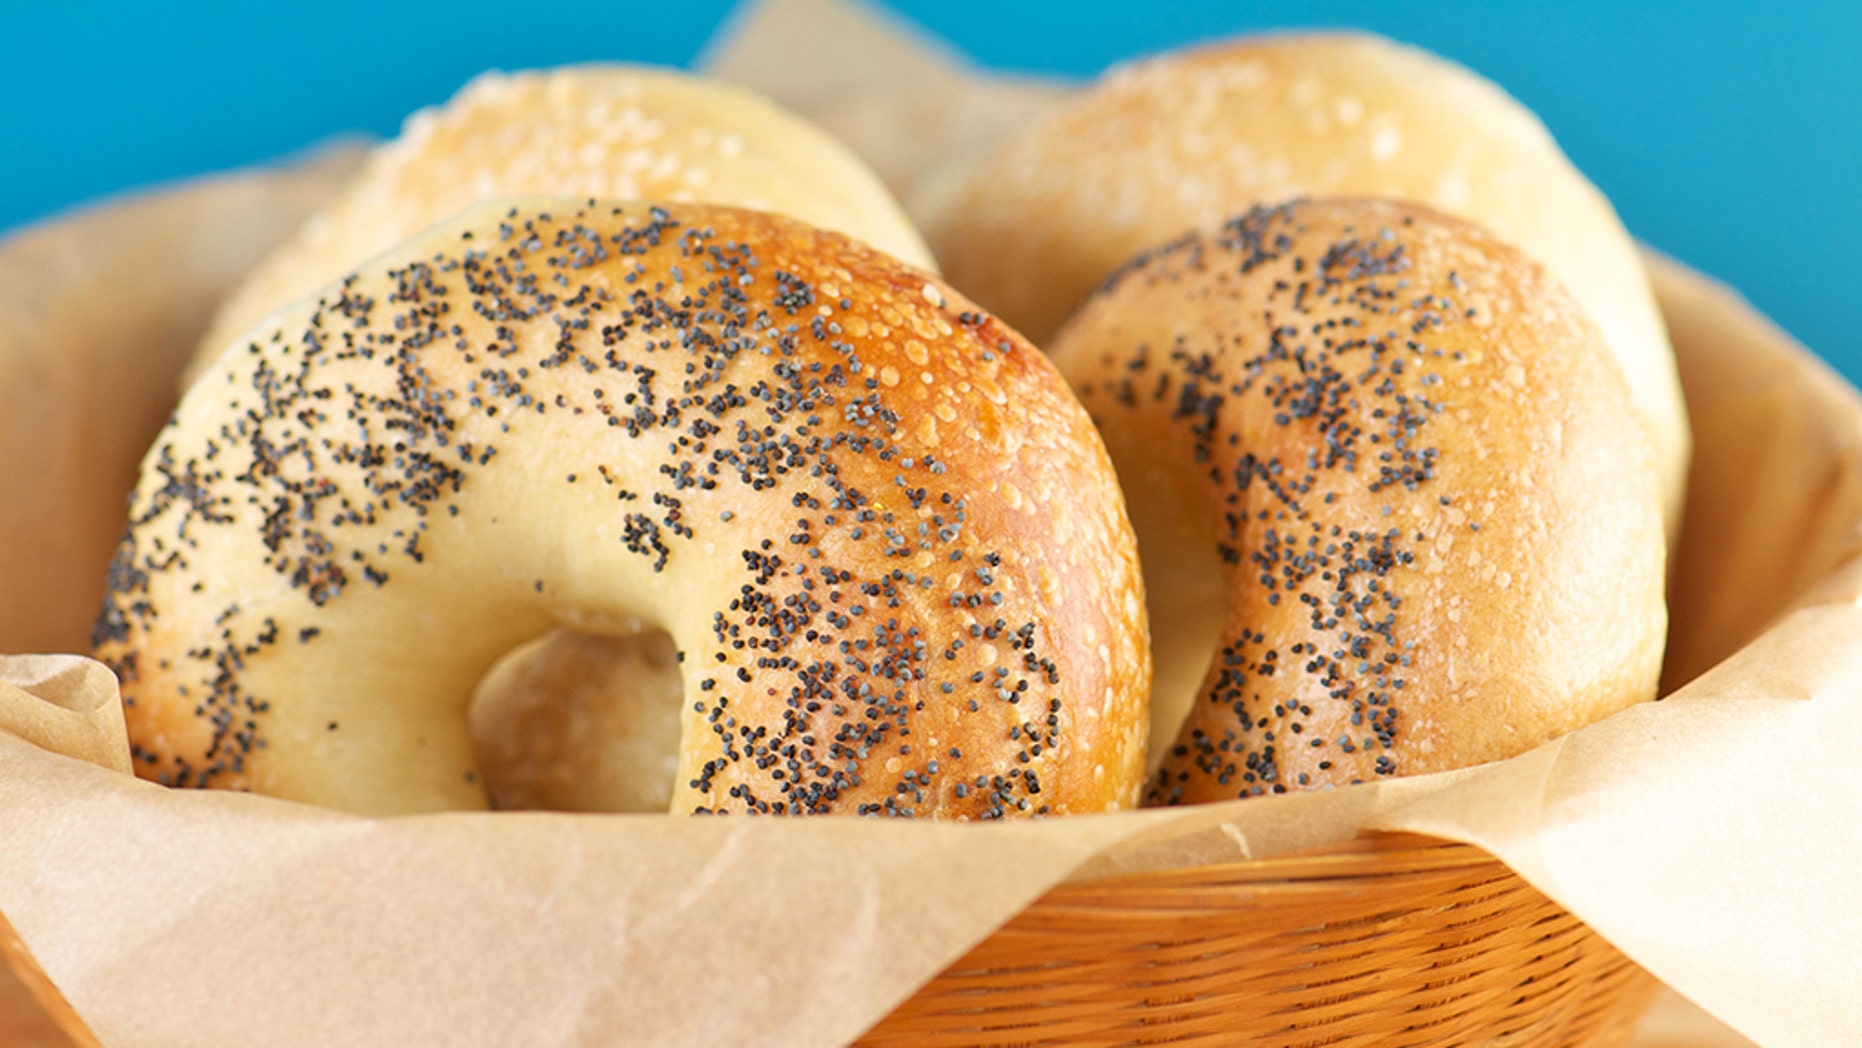 Man shares &#39;St. Louis secret&#39; to ordering bagels, prompts outrage on Twitter: &#39;You should be ...